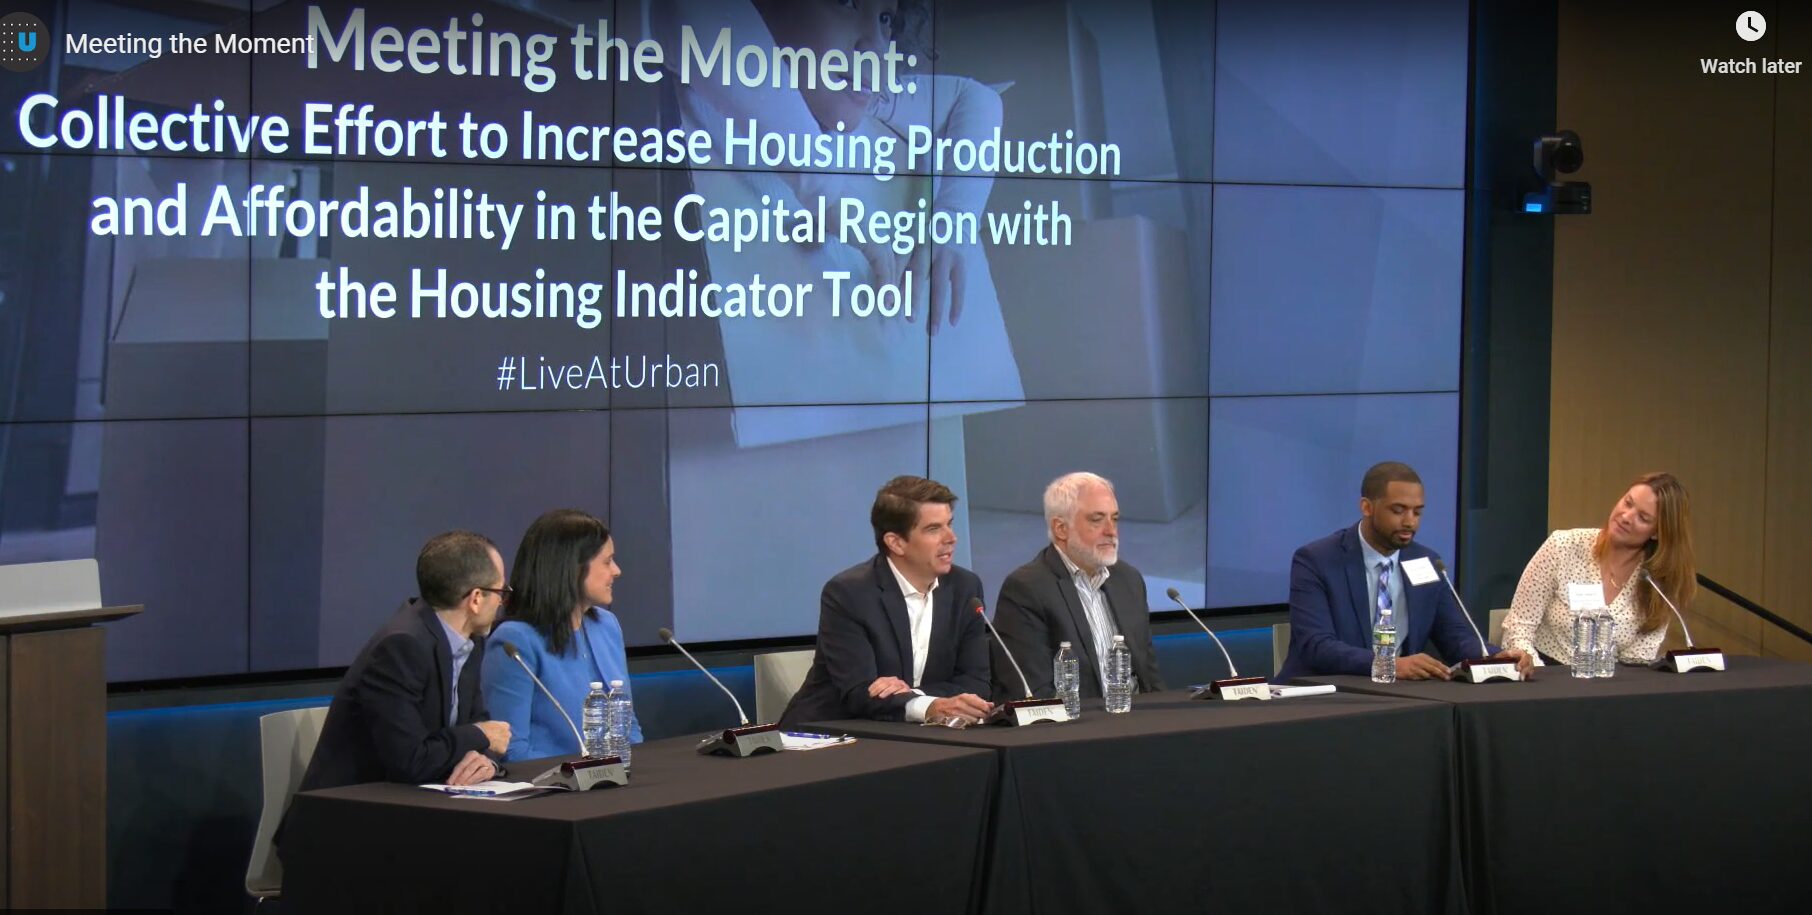 Meeting the Moment: Collective Effort to Increase Housing Production and Affordability in the Capital Region with the Housing Indicator Tool, Featuring Kate Owens